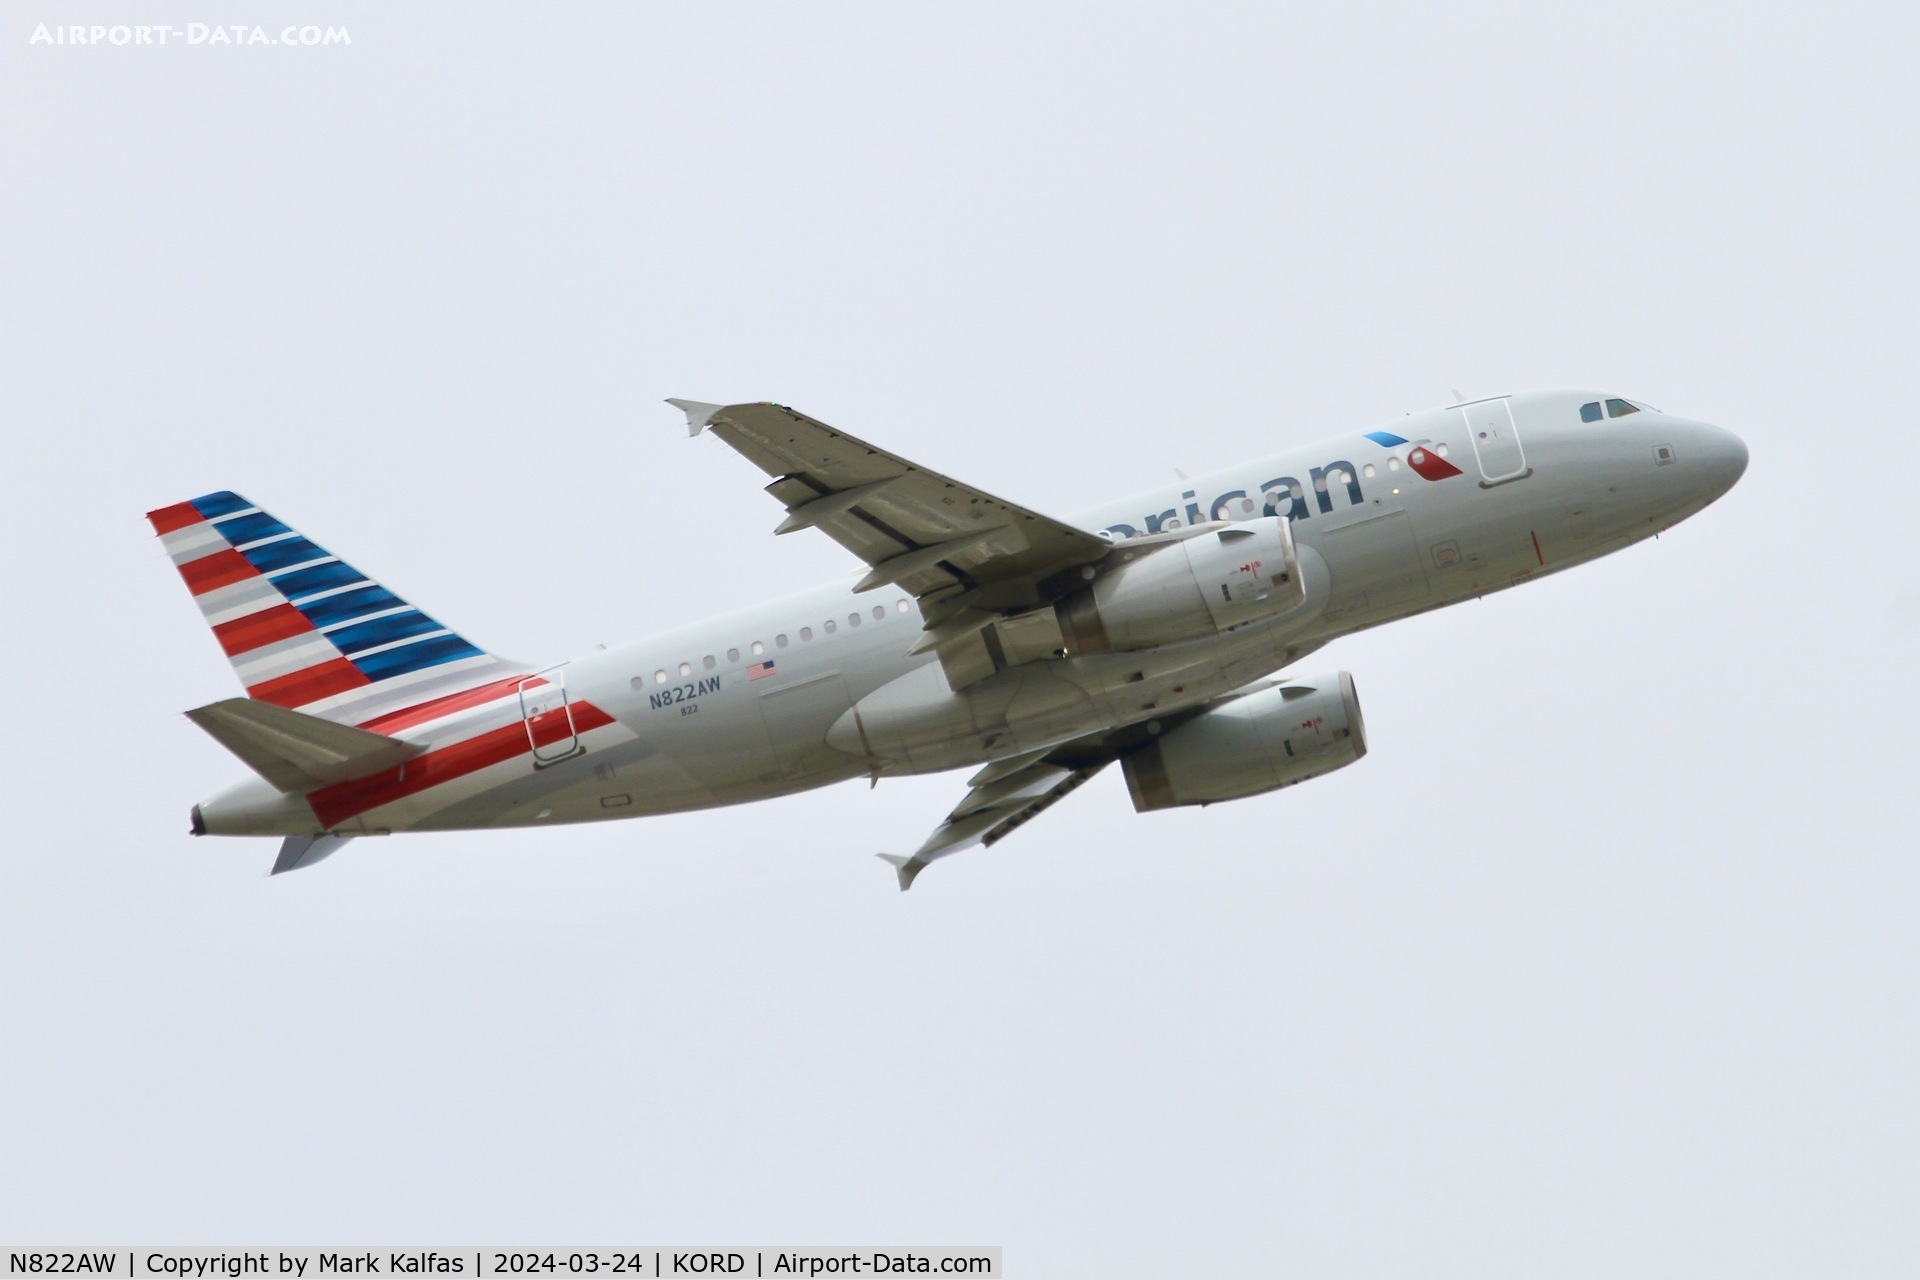 N822AW, 2000 Airbus A319-132 C/N 1410, A319 American Airlines Airbus A319-132 N822AW
AAL2043  ORD-LGA